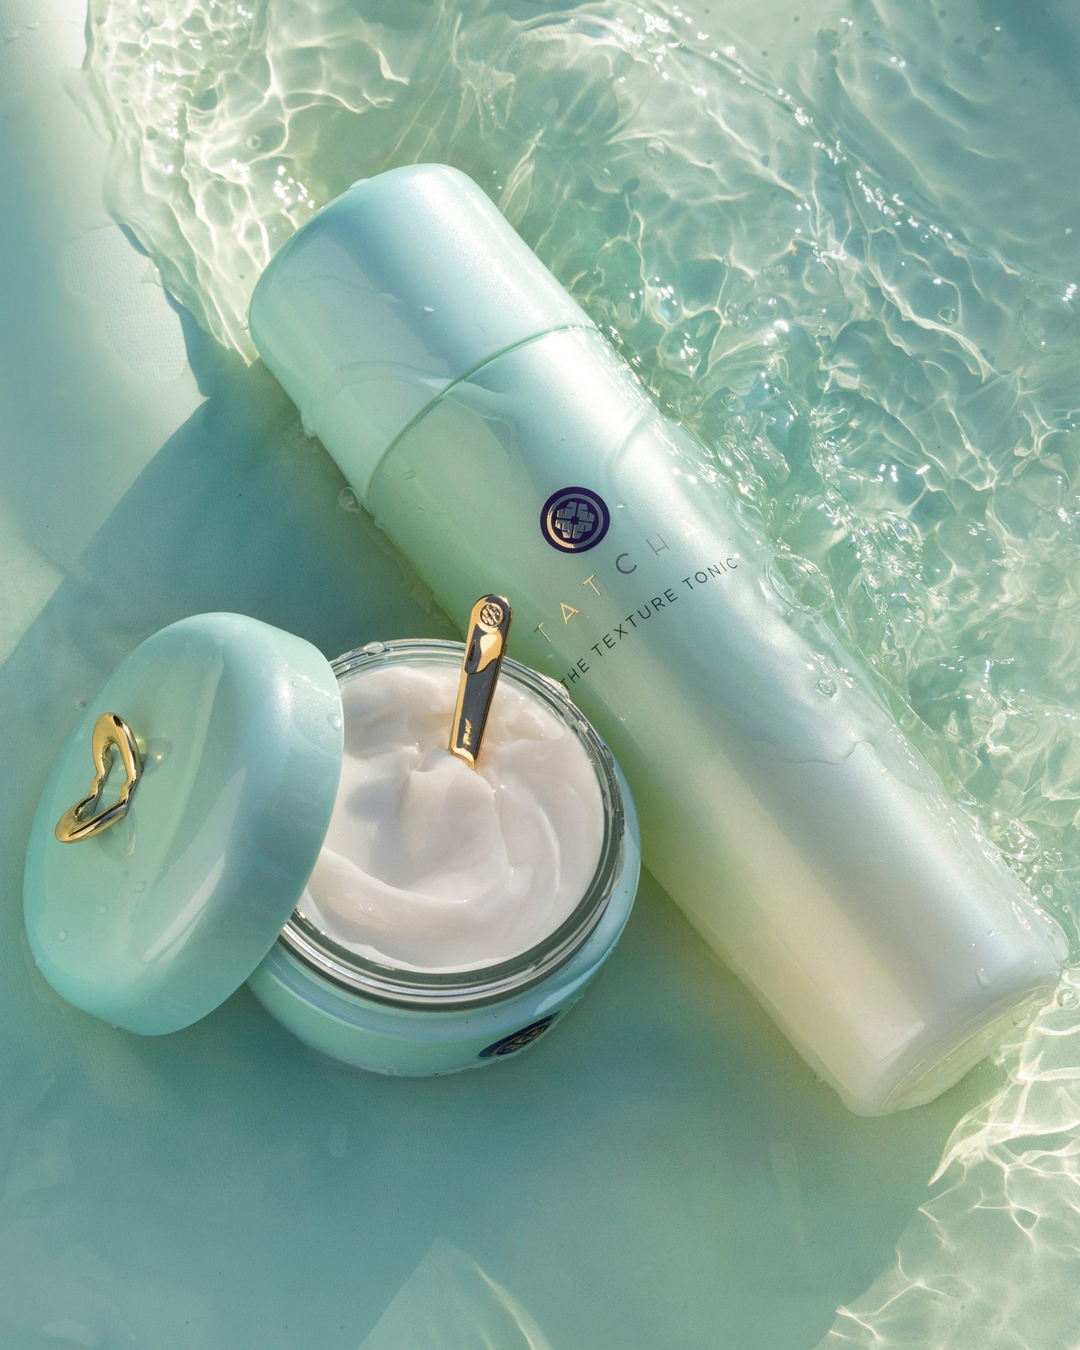 Tatcha bottles are seen in water with the lid off and a golden spoon protruding.